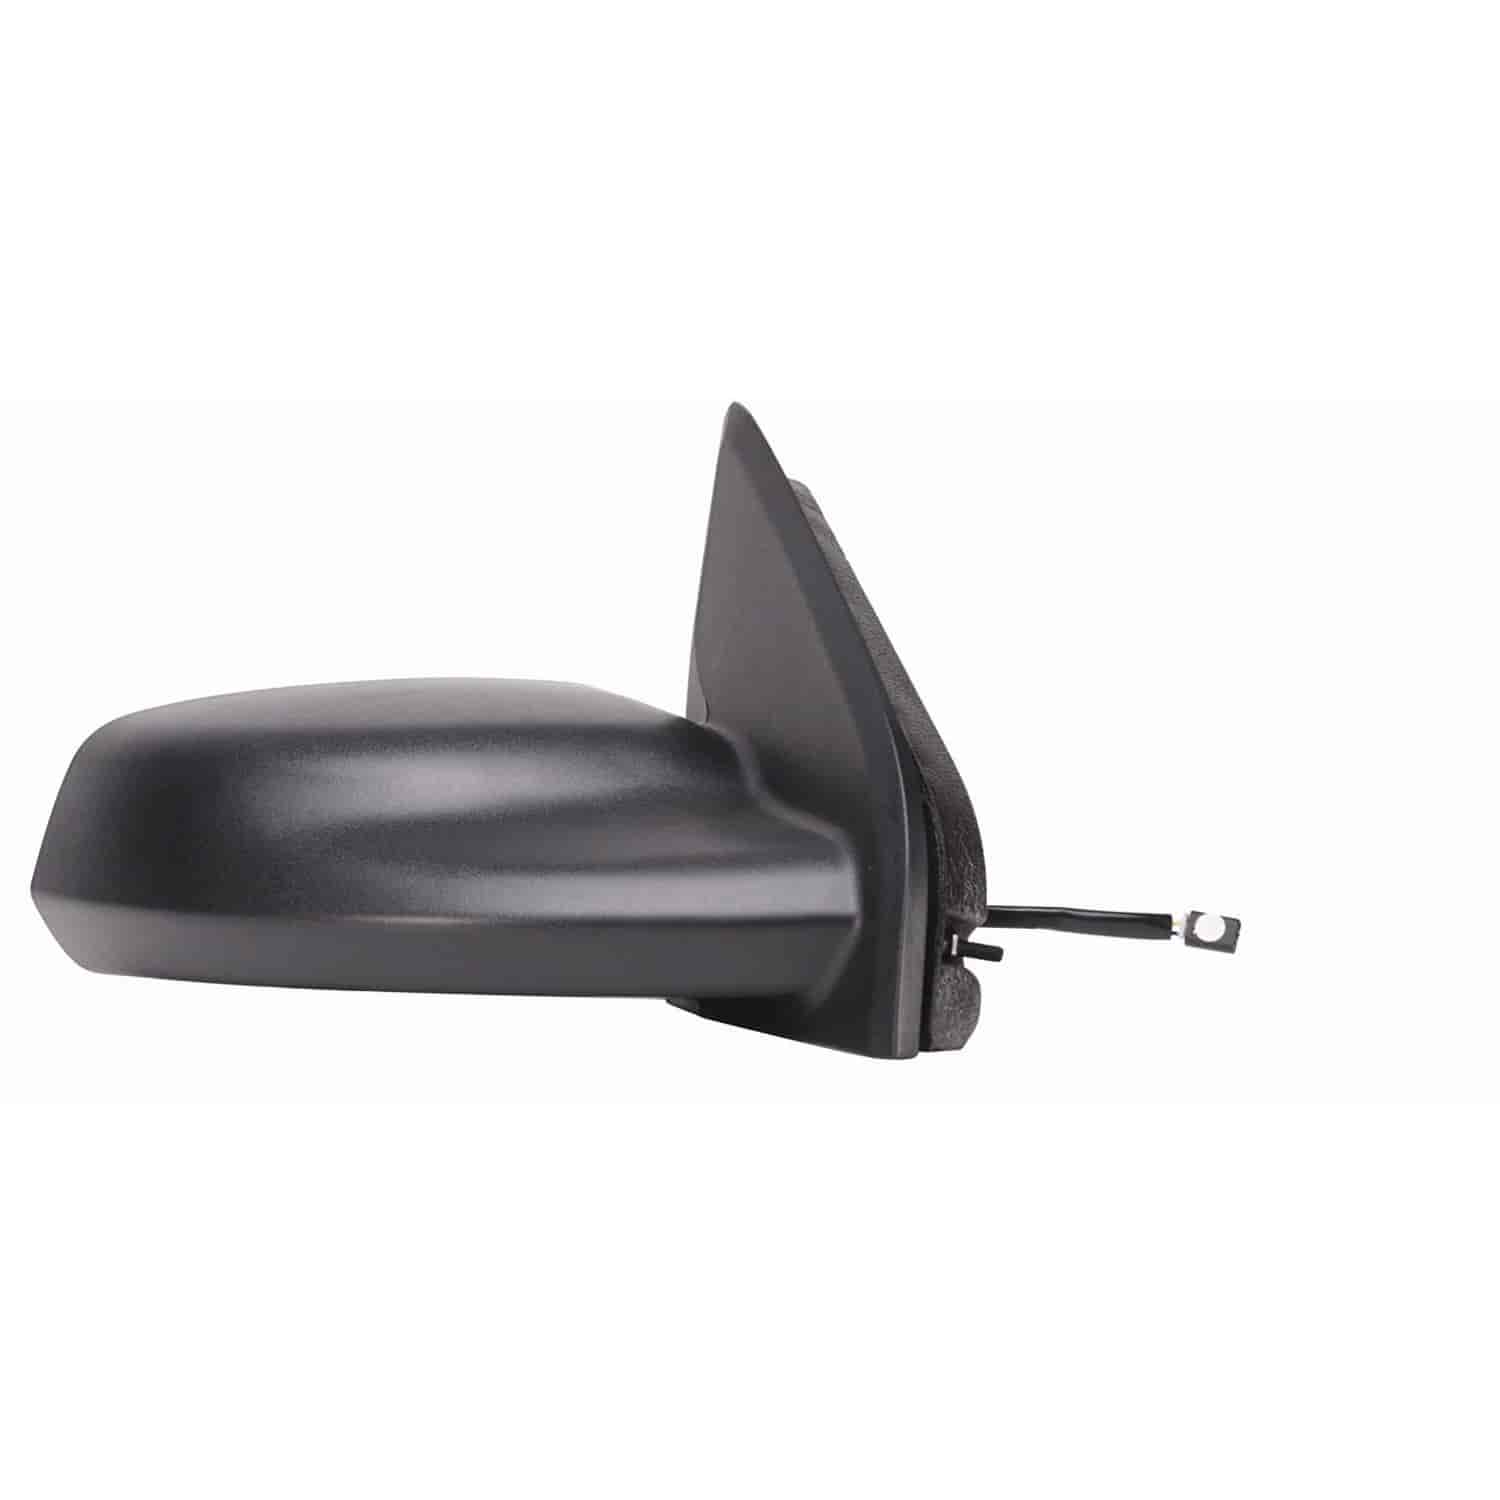 OEM Style Replacement mirror for 03-07 Saturn Ion 3 Sedan passenger side mirror tested to fit and fu